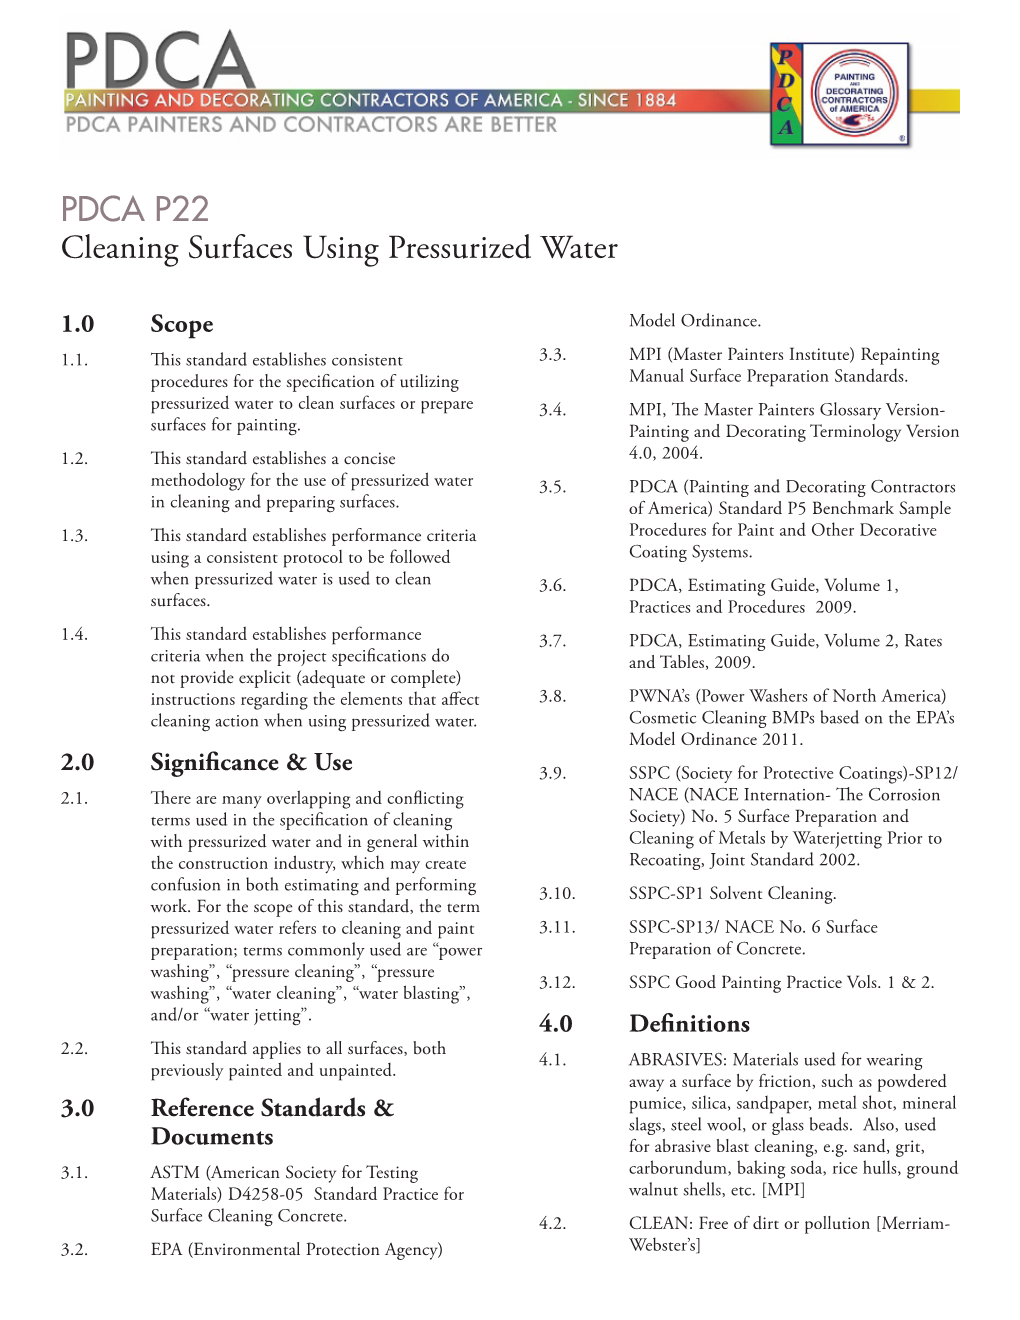 PDCA P22 Cleaning Surfaces Using Pressurized Water